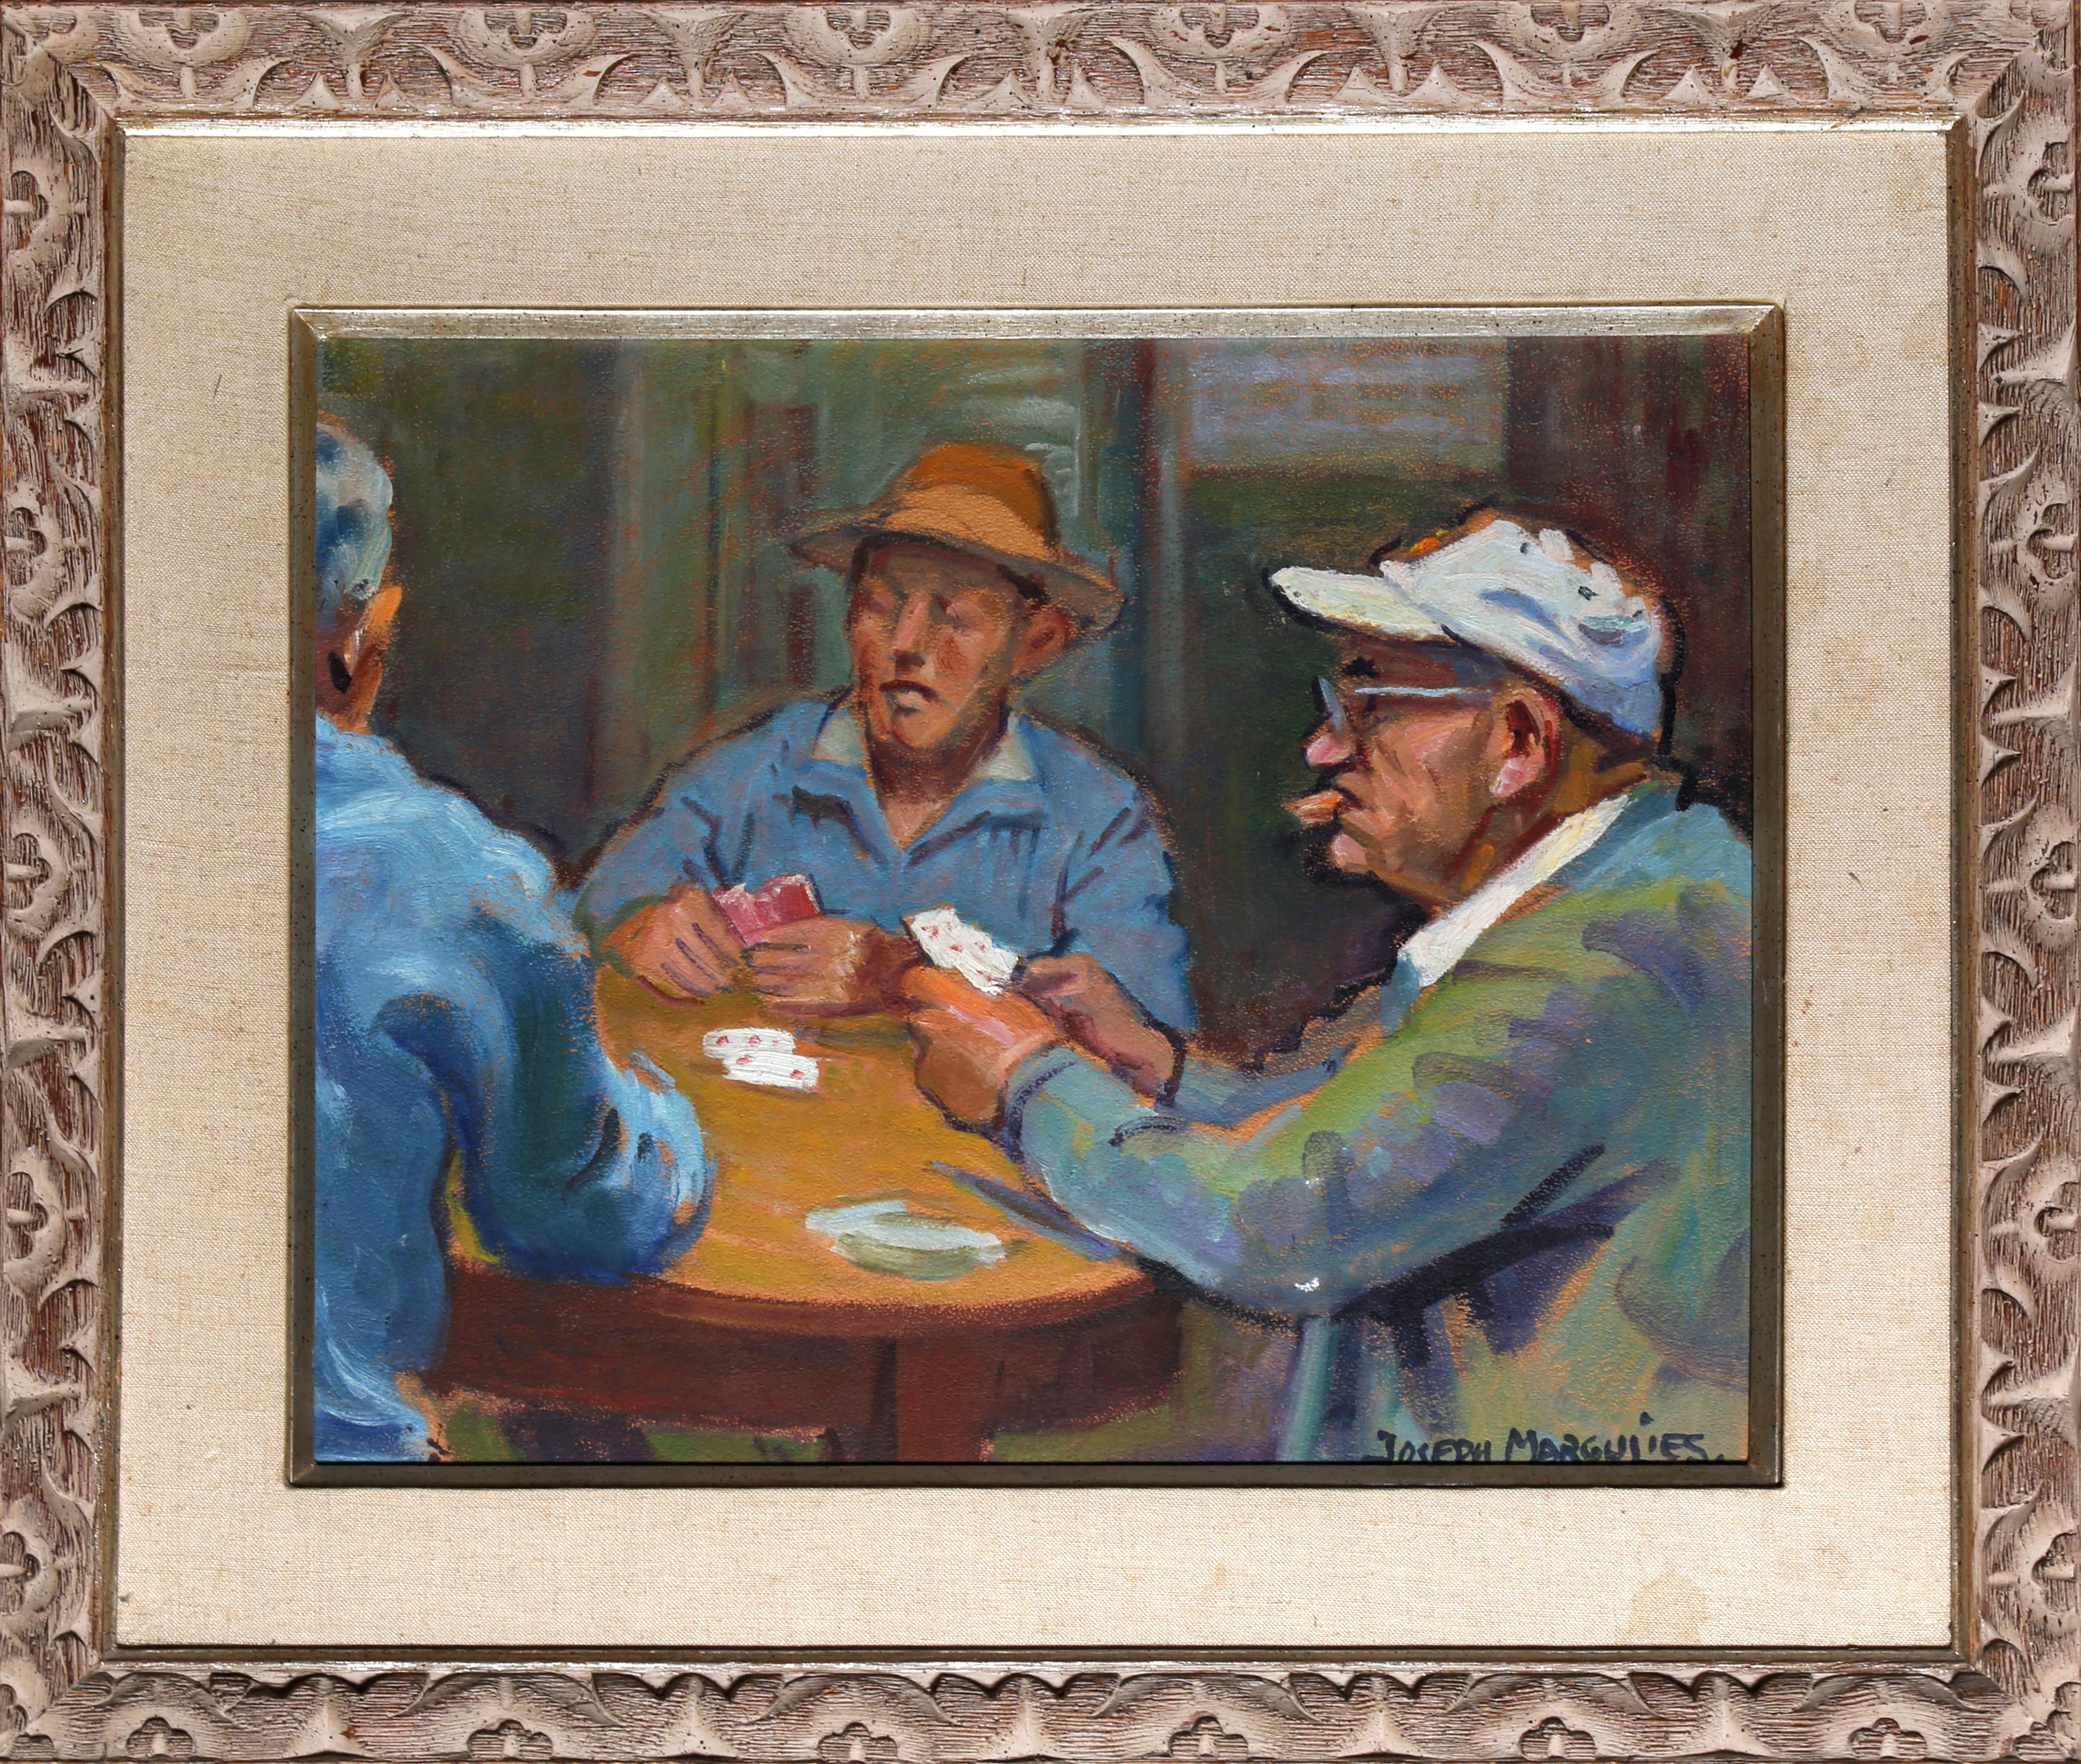 Men Playing Cards, Painting by Joseph Margulies